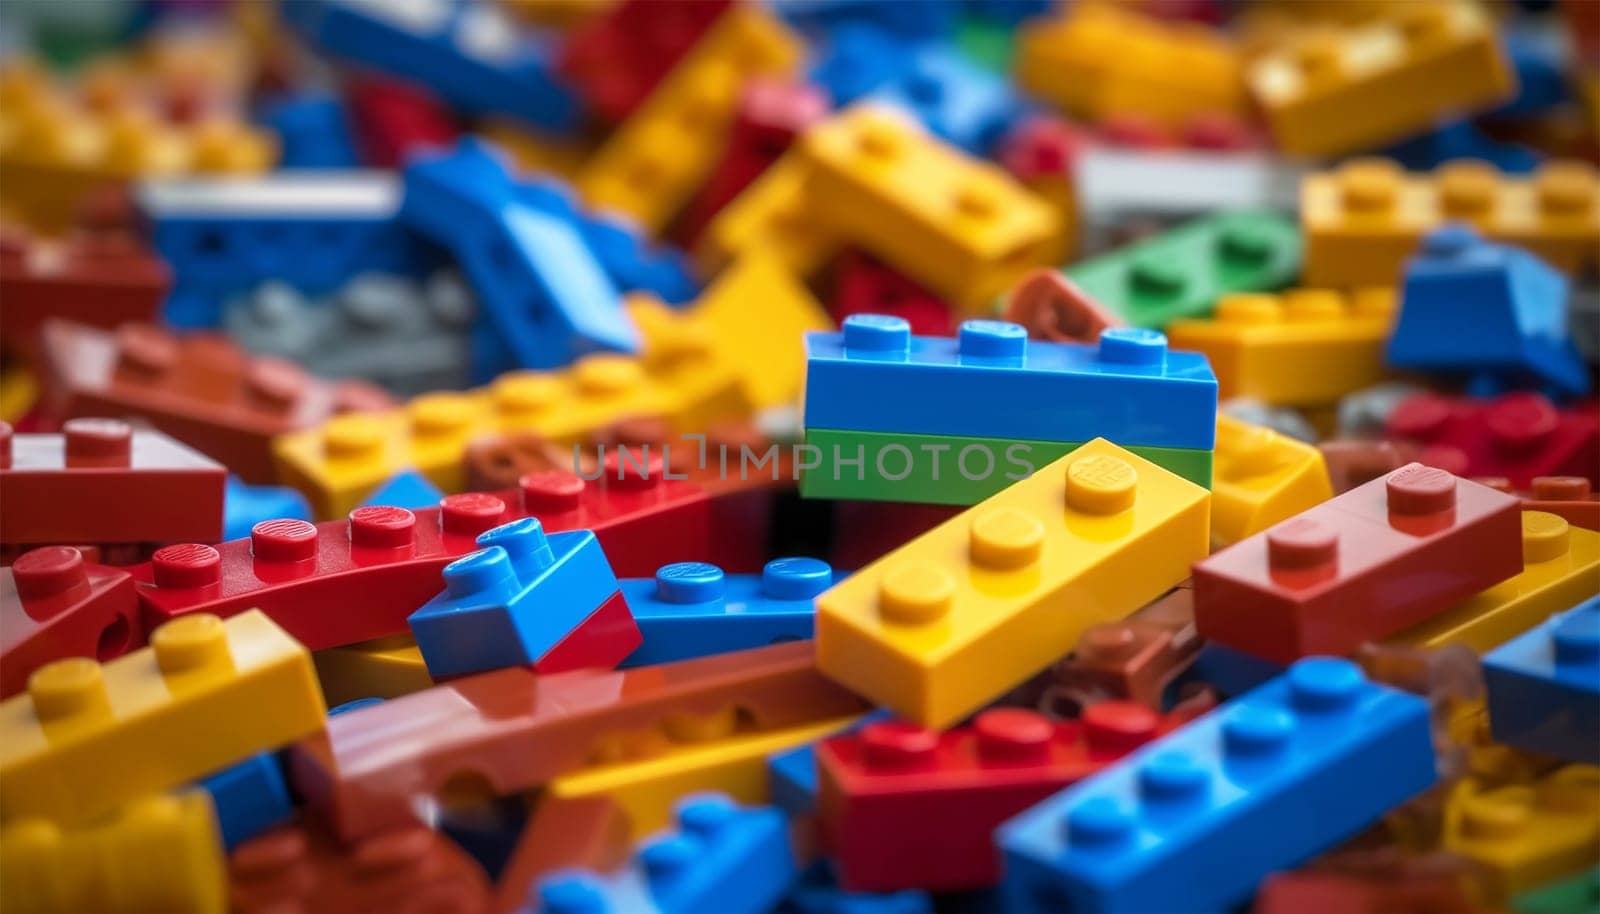 Set of brick block building toys 3d isometric illustration for children. Colorful bricks toy. Part and piece for decorative design and creative game. Copy space colorful background plastic